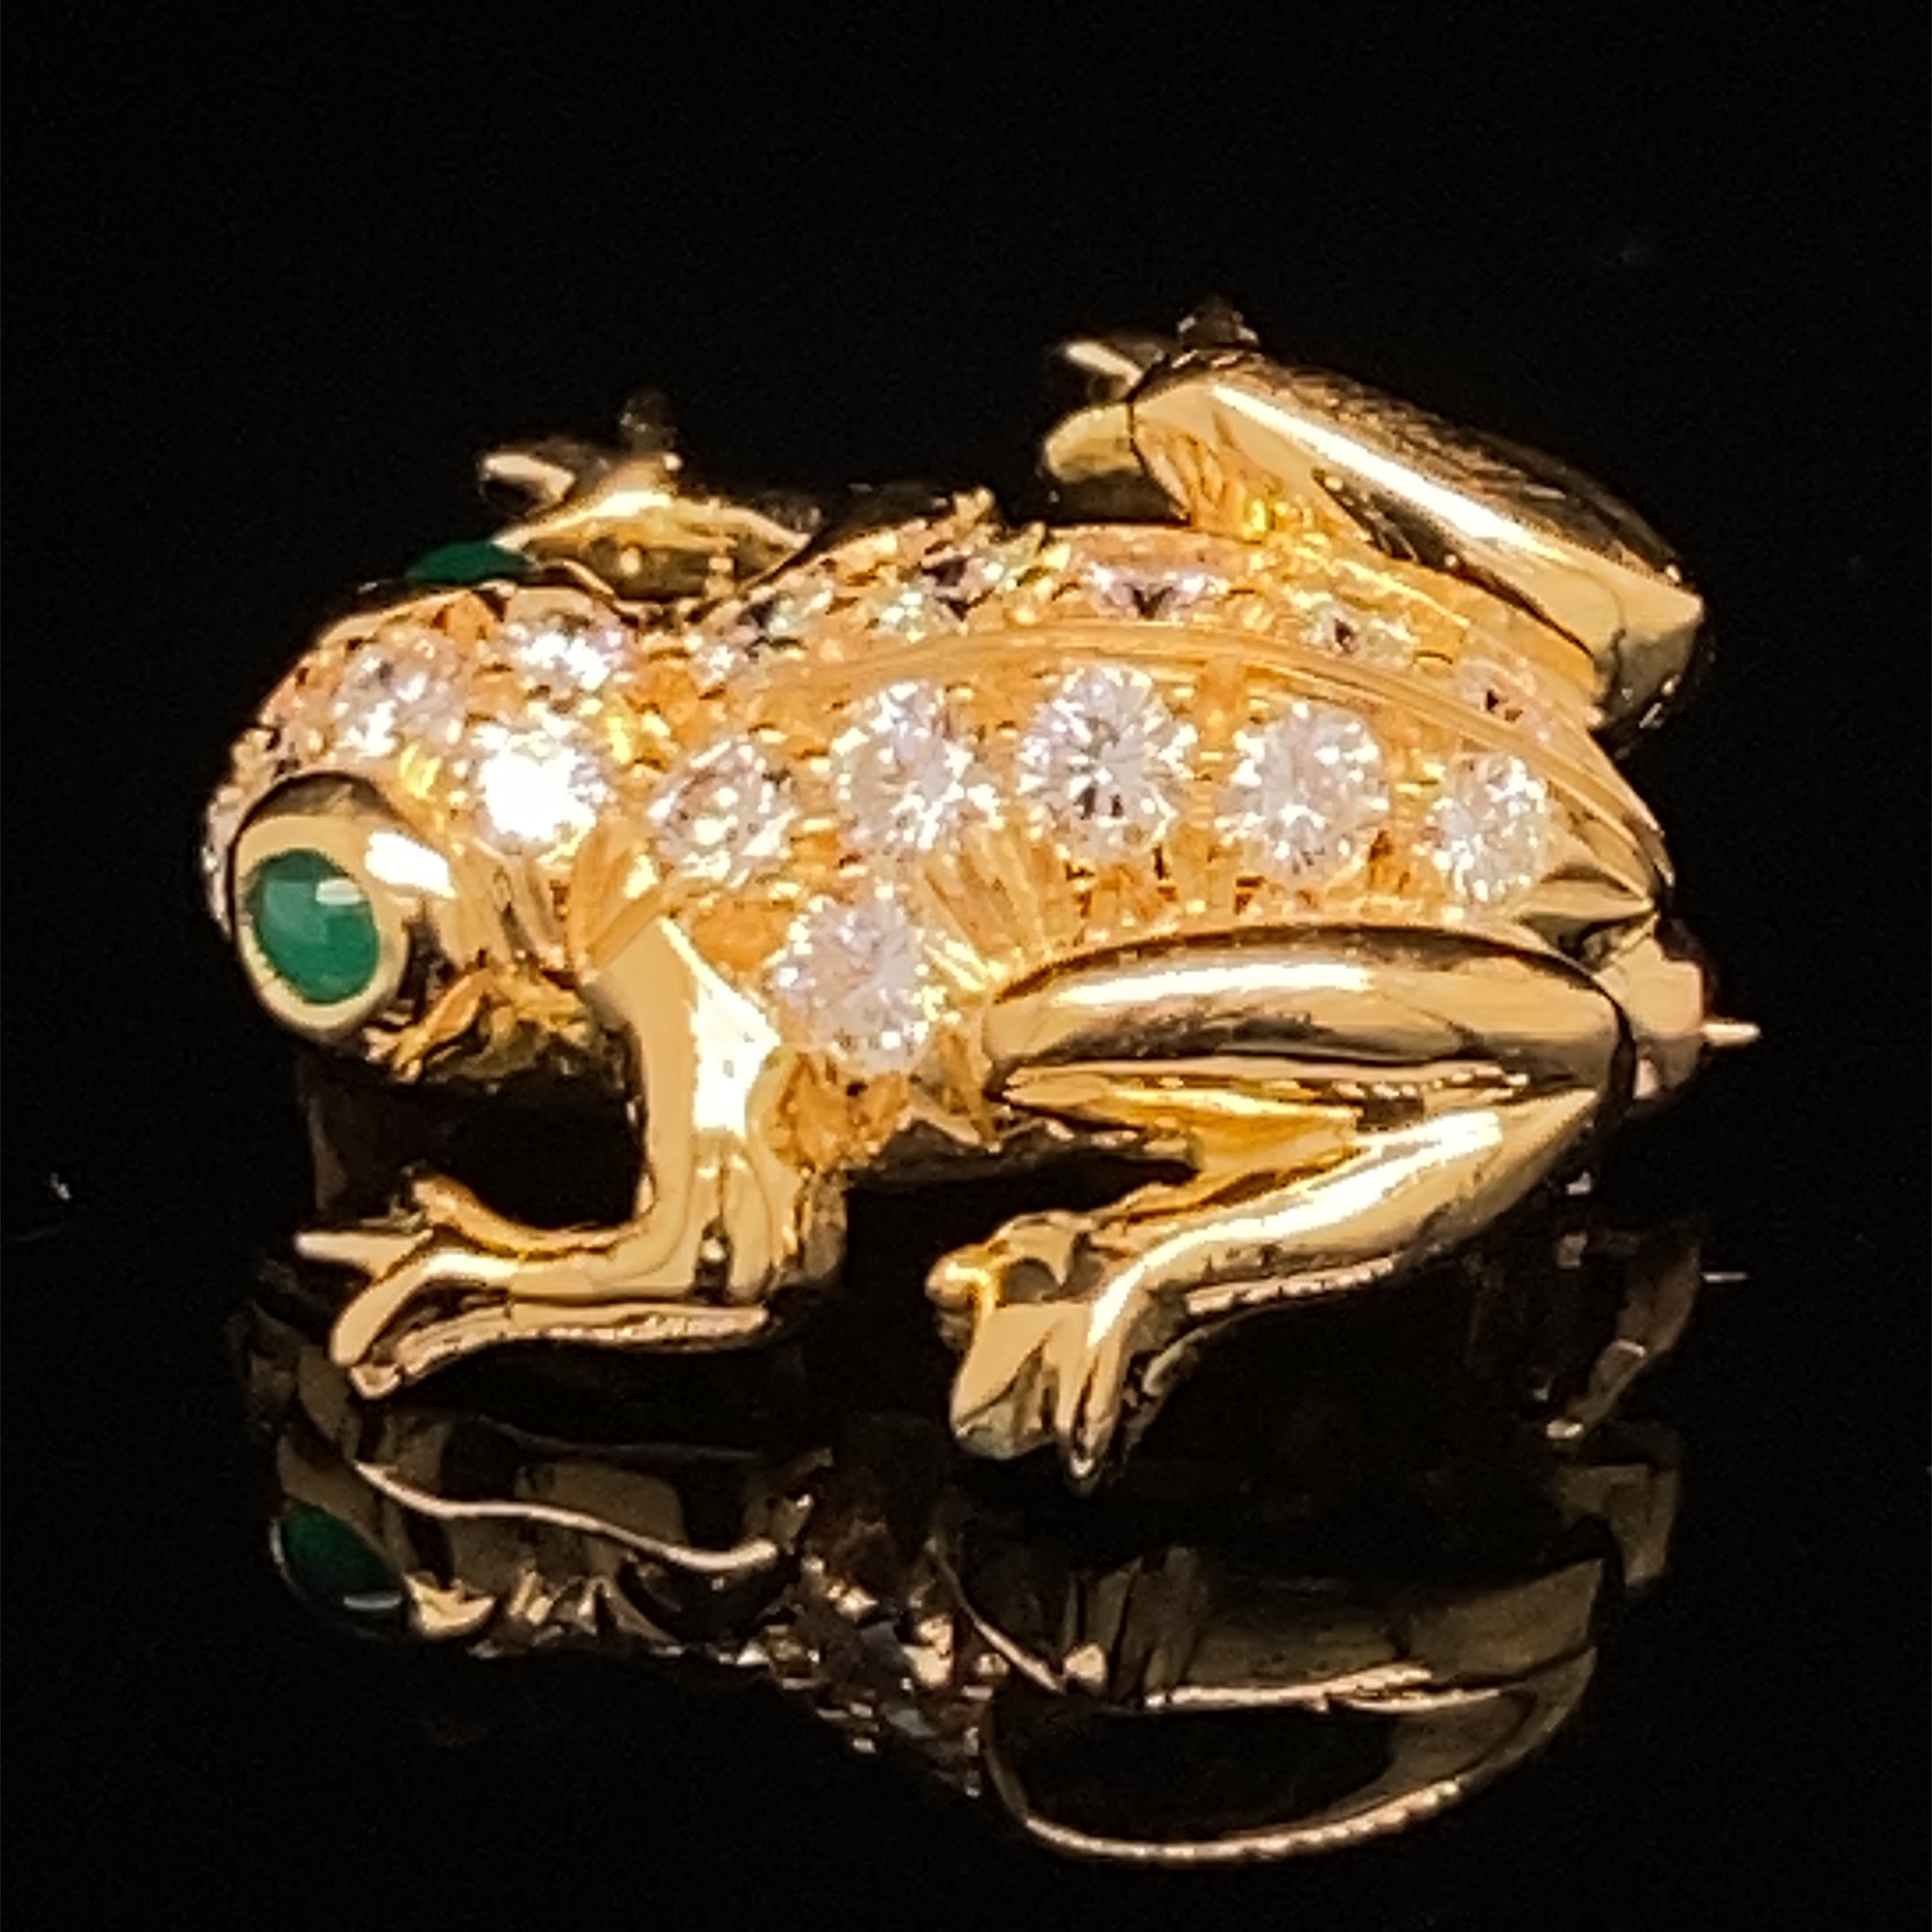 Frog, large Frog with Diamond encrusted body – 18K Gold Animal Pins/Brooches